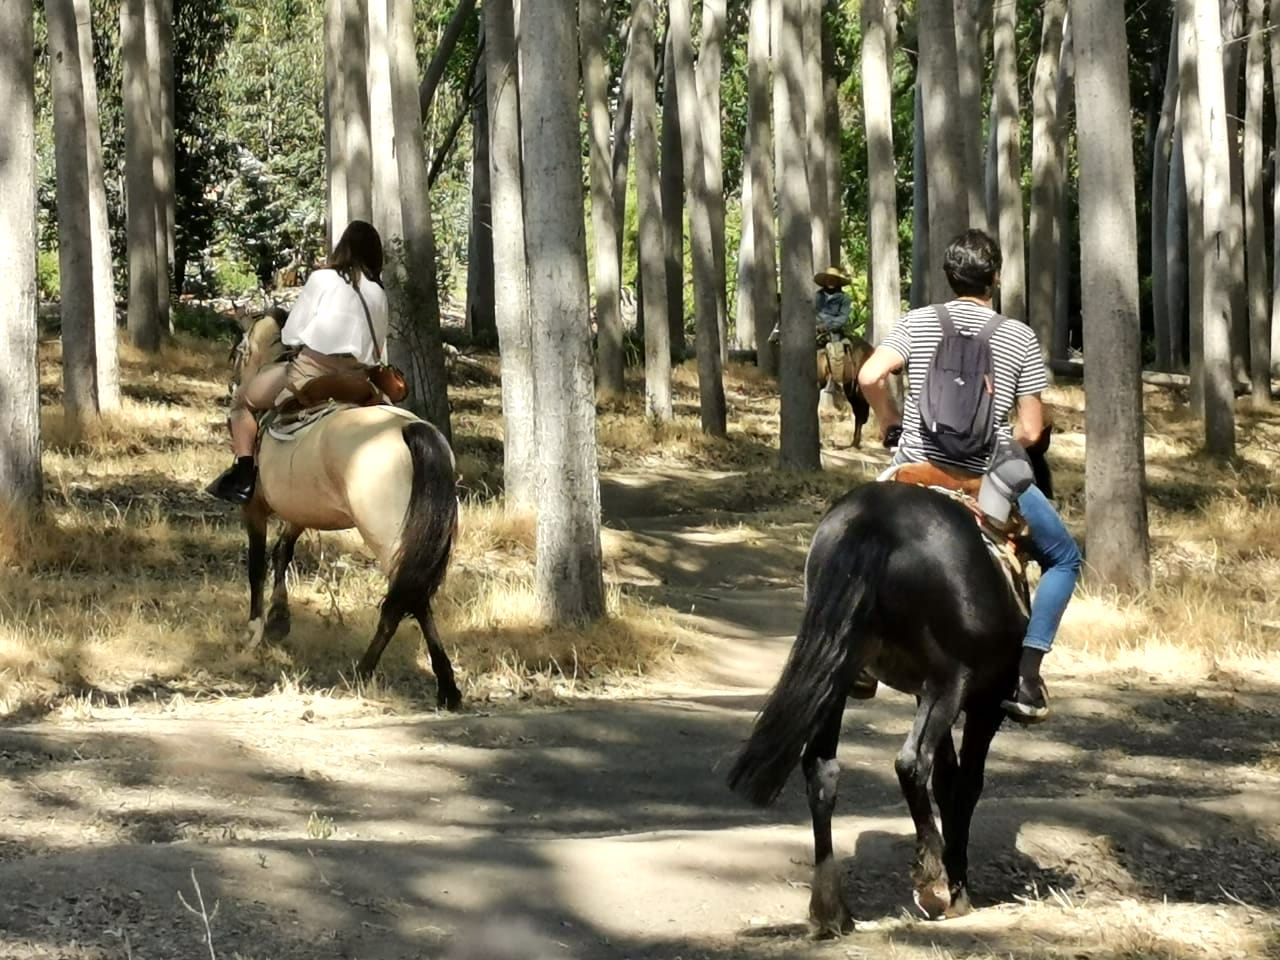 3. Maipo horseback wine tour - In to the forest